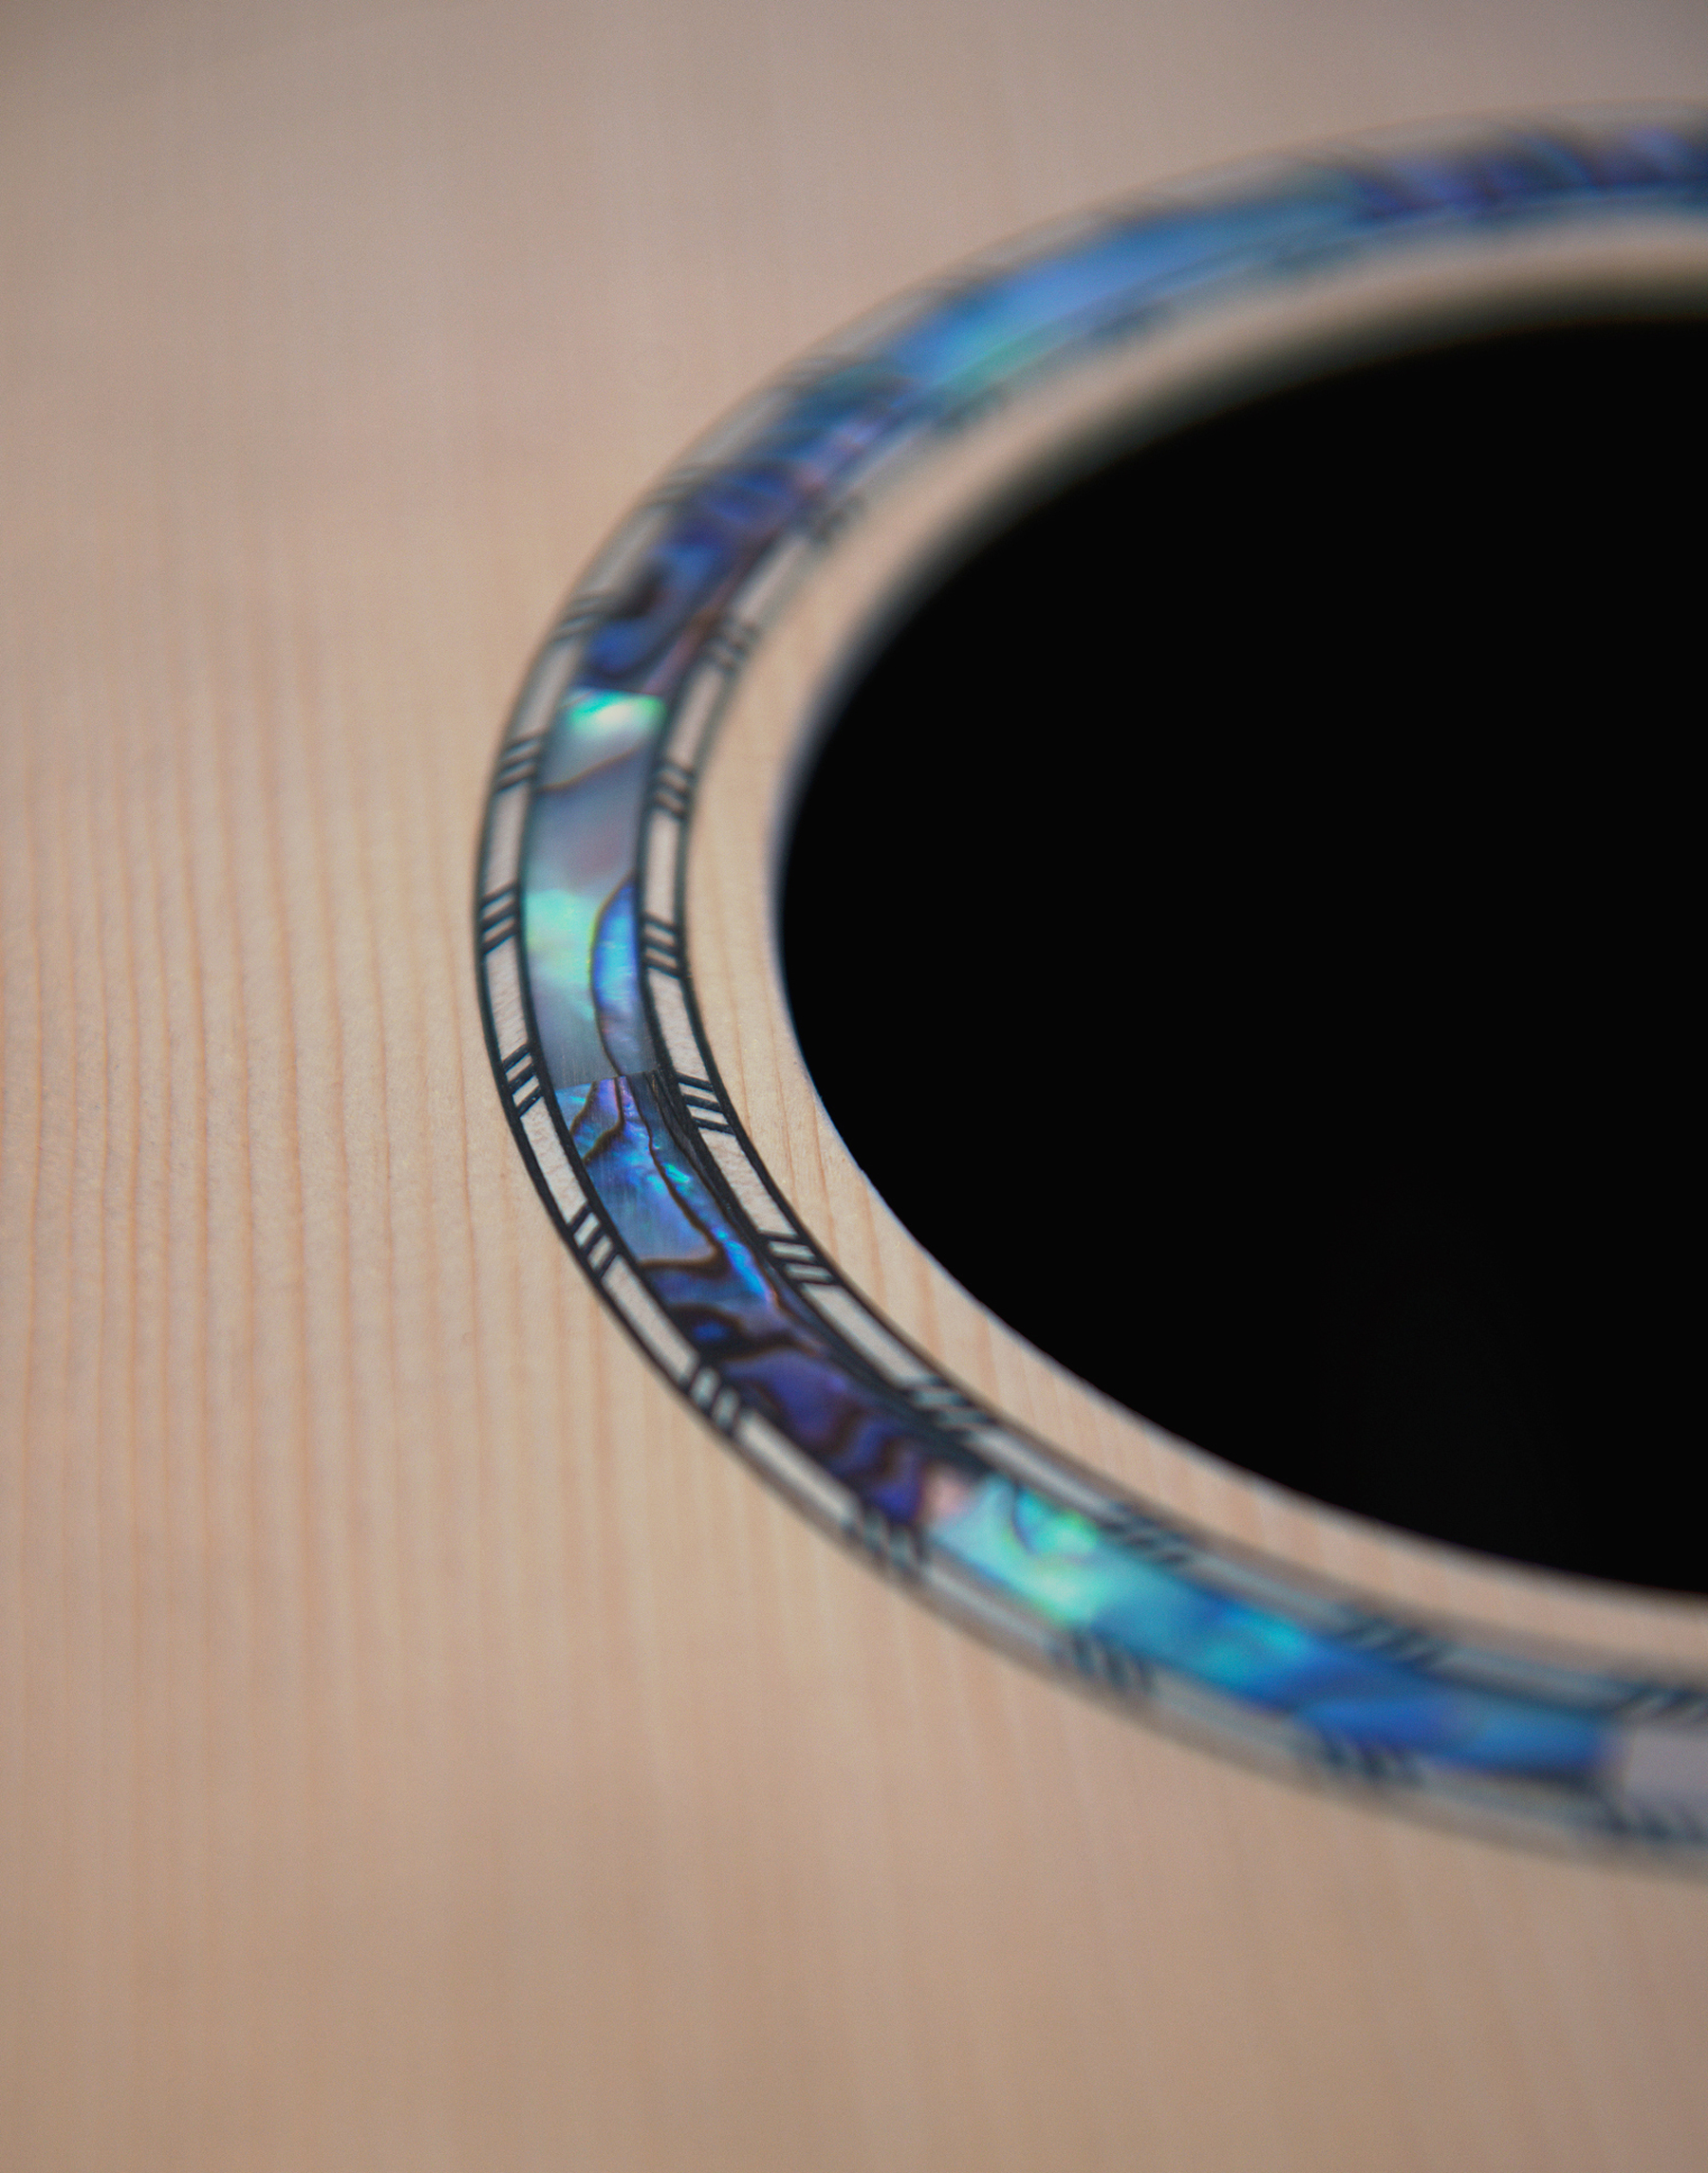 Guitar Maker Peter Stephen paua inlay around the sound hole of an acoustic guitar